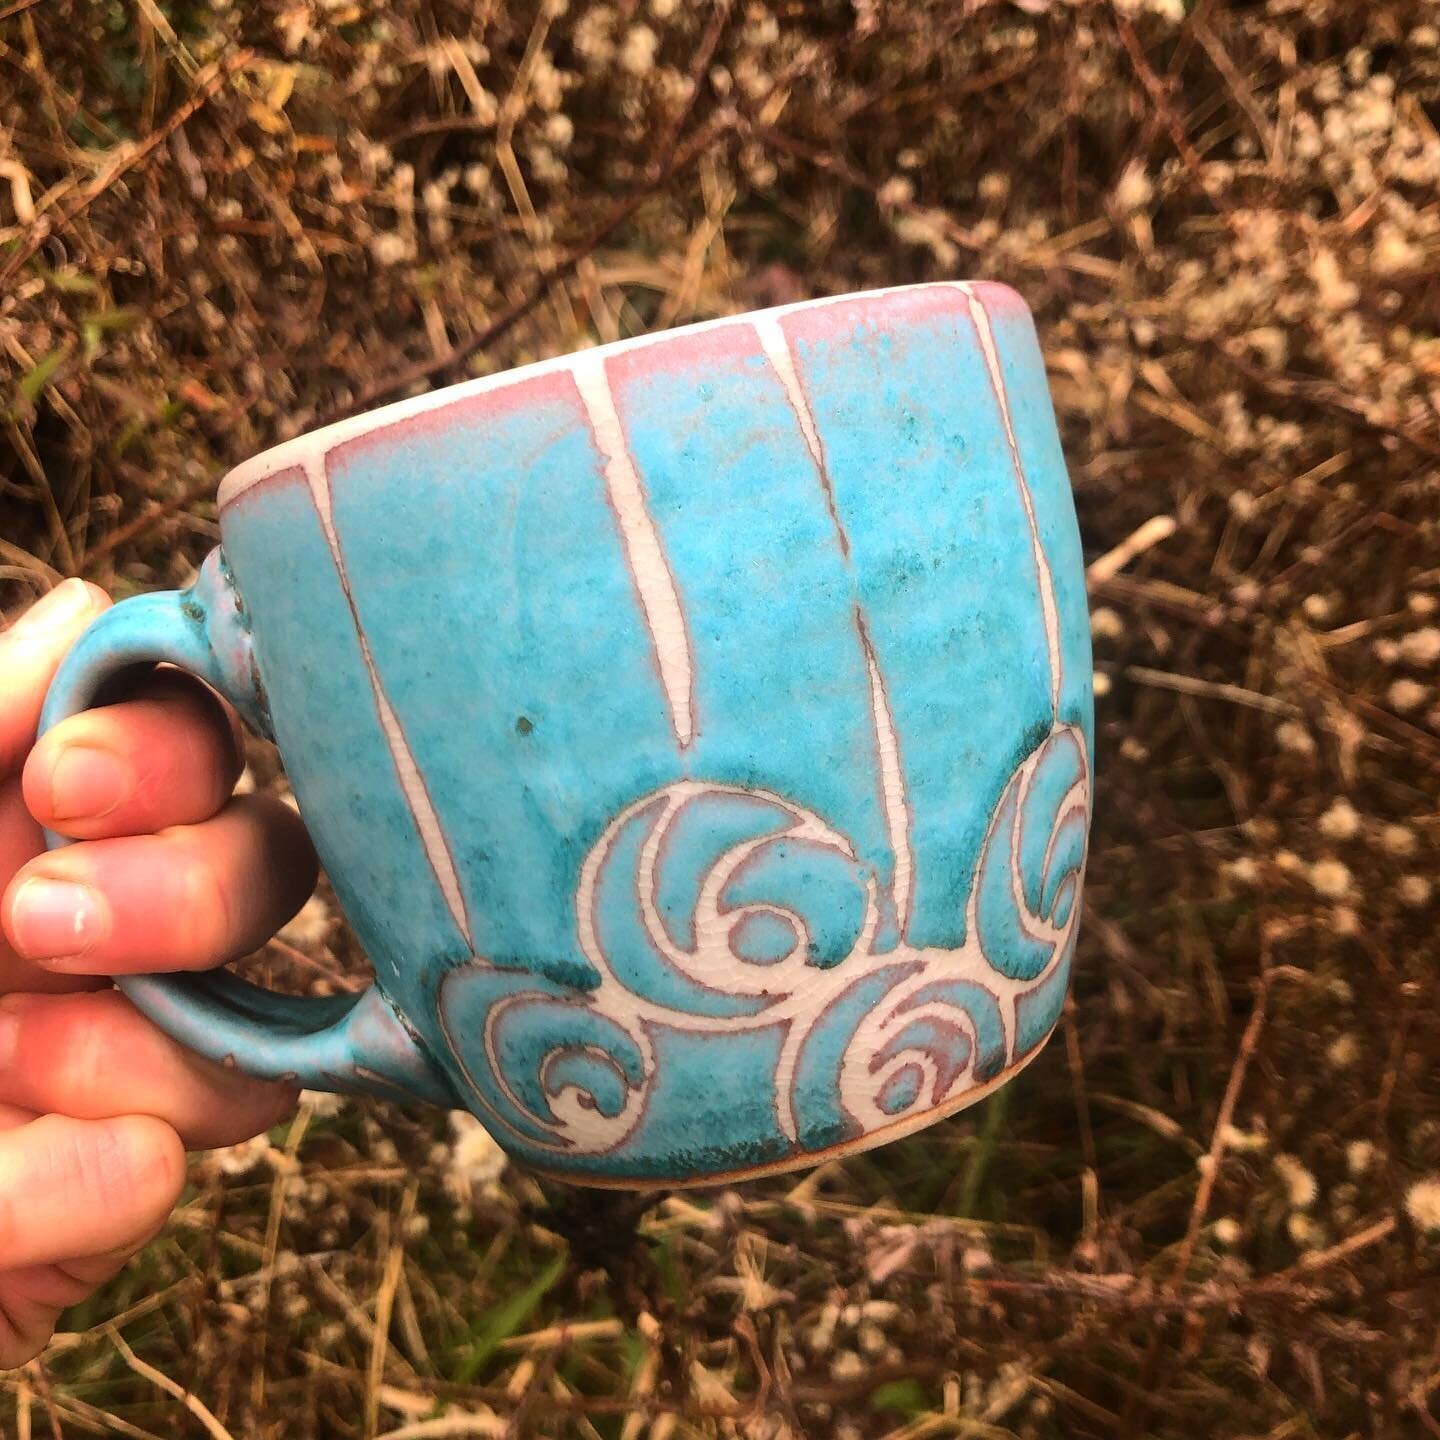 A cheery cappuccino mug for a gloomy day, and a quick shot of the glazing madness happening in my studio this weekend! Despite the chaos that always ensues the day before I load the kiln, I&rsquo;m pretty tickled to have my first fire of the season r